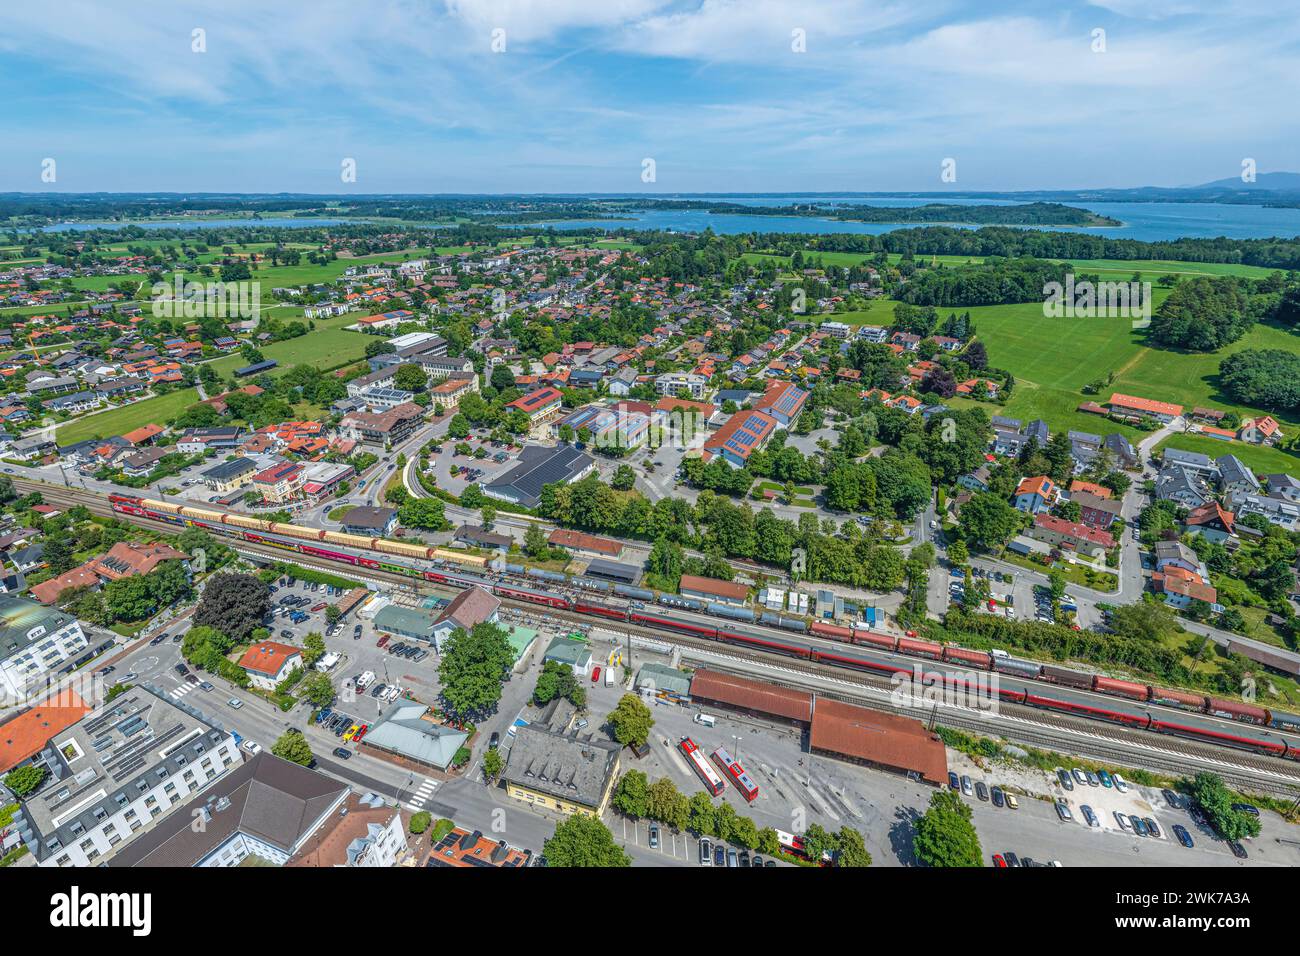 The municipality of Prien am Chiemsee in the Upper Bavarian Chiemgau region from above Stock Photo